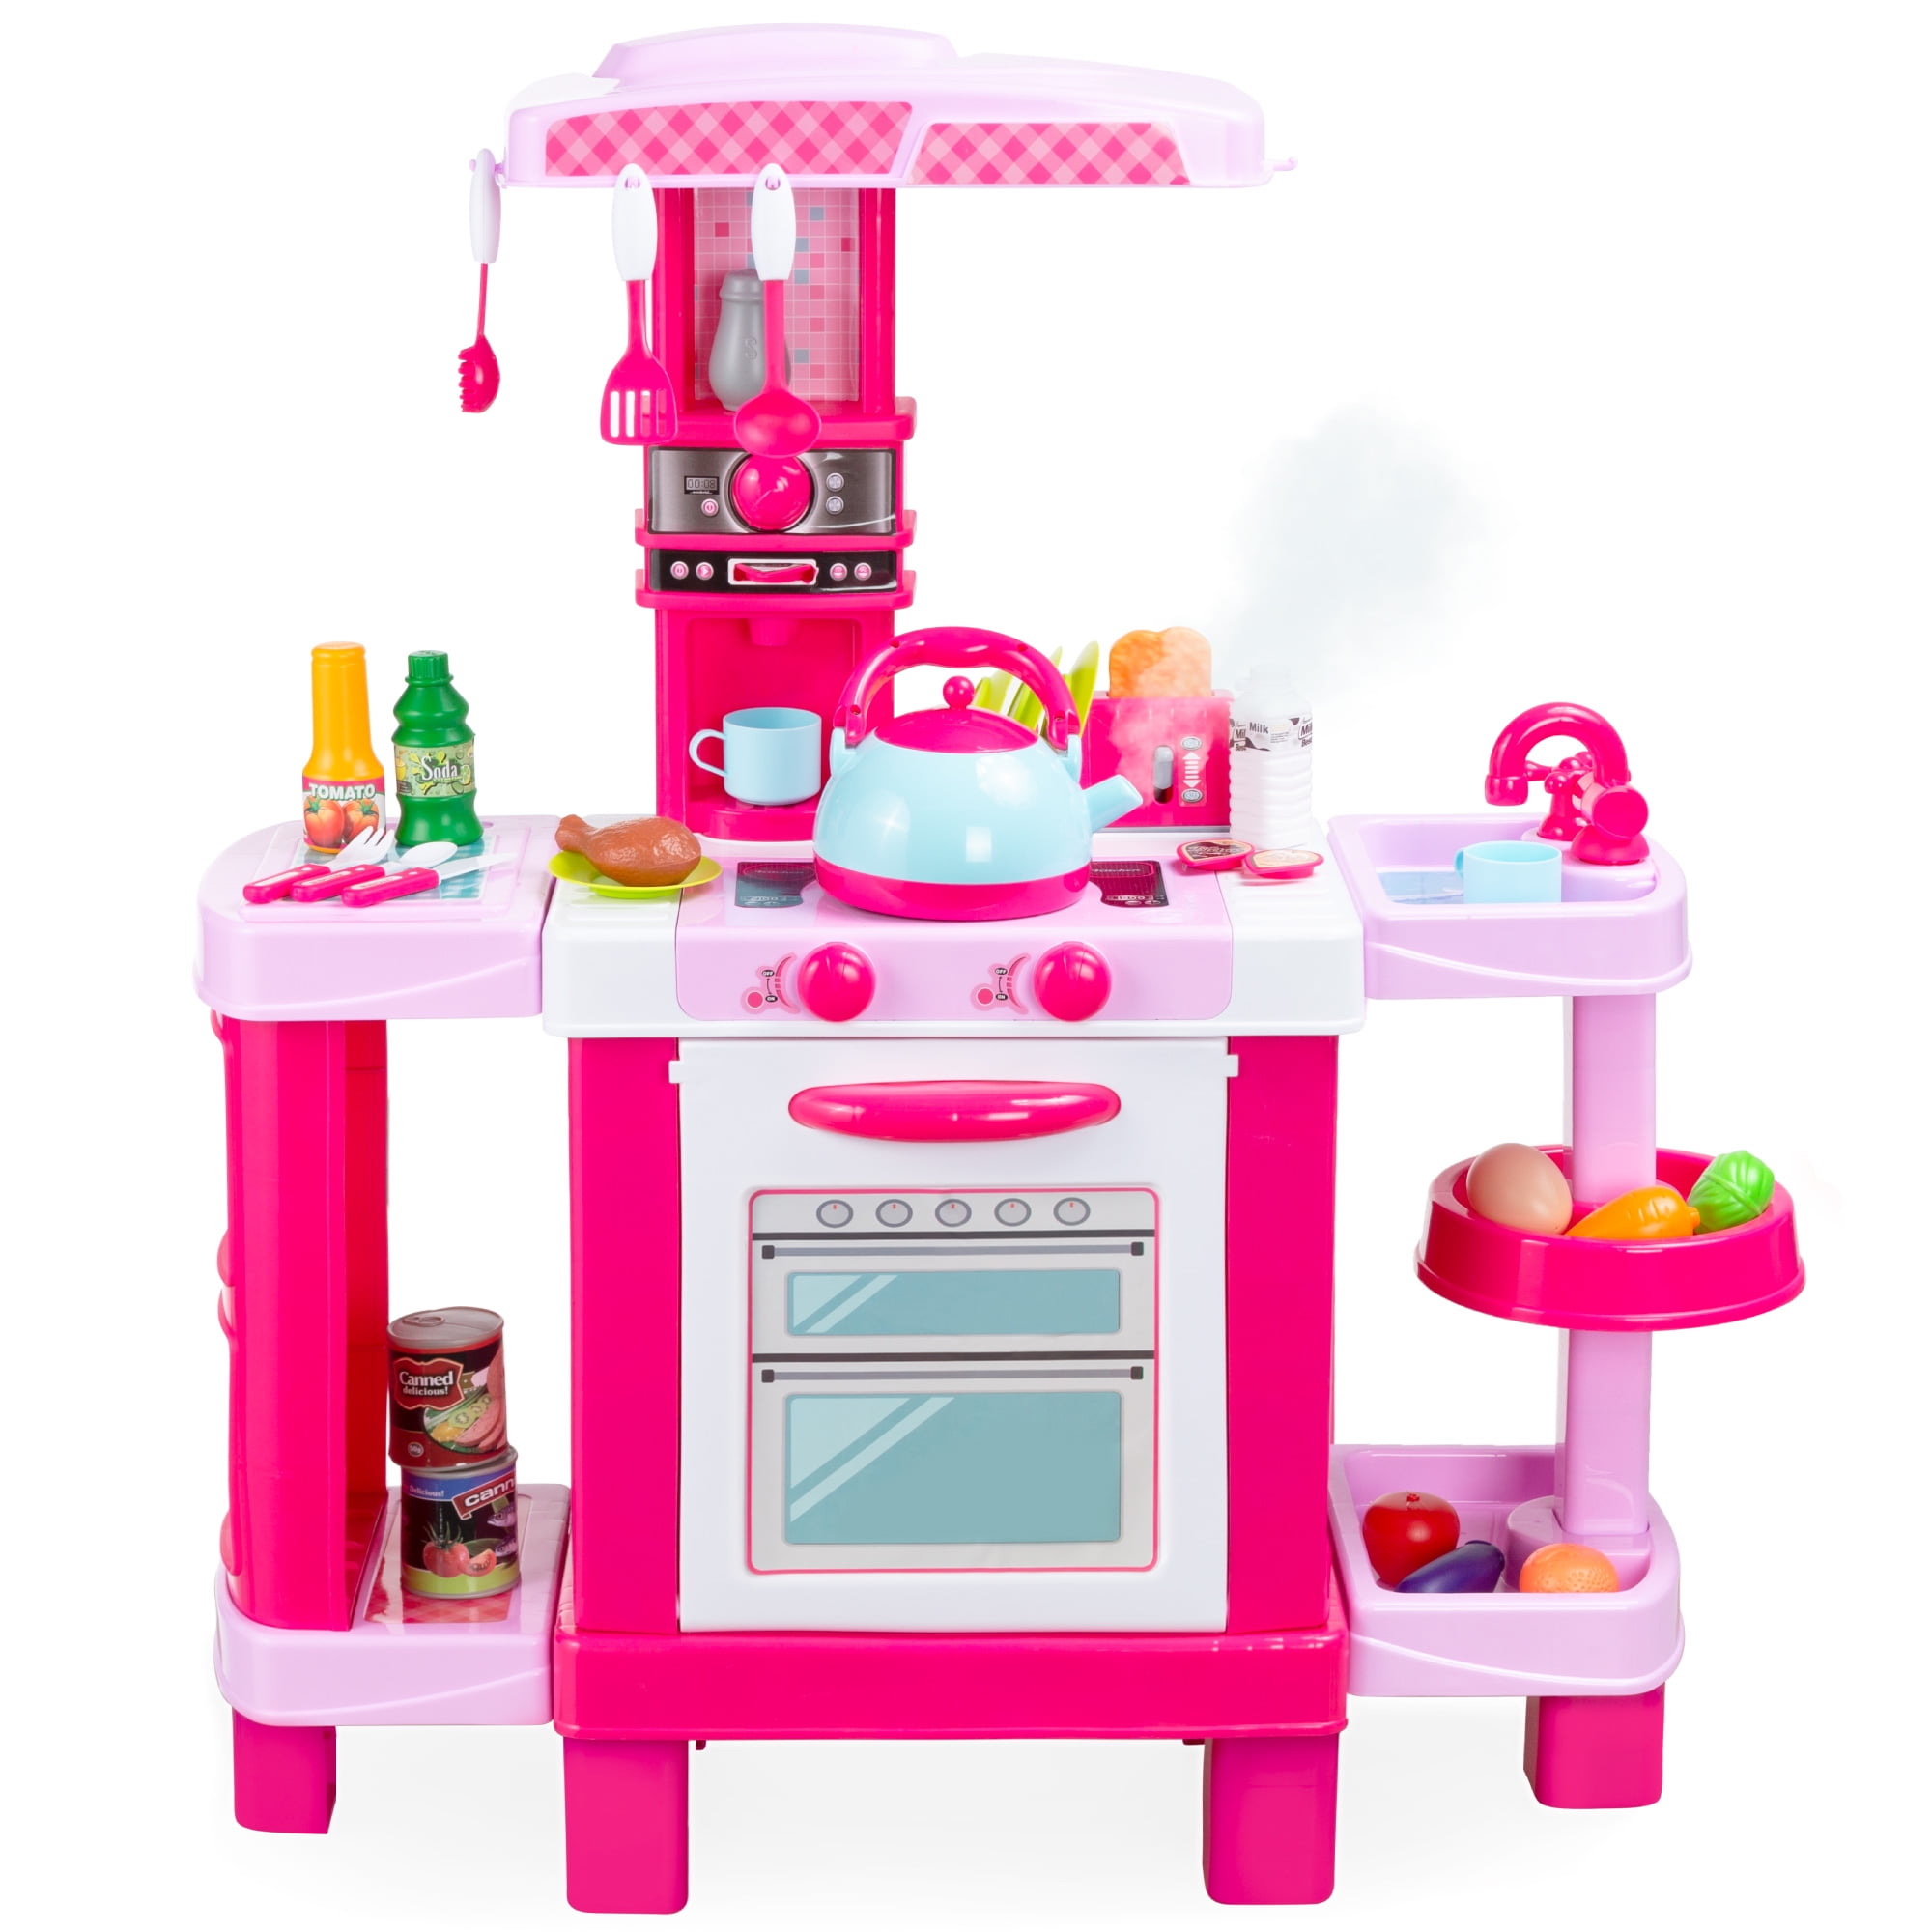 Best Choice Products Pretend Play Kitchen Toy Set for Kids with Water Vapor Teapot, 34